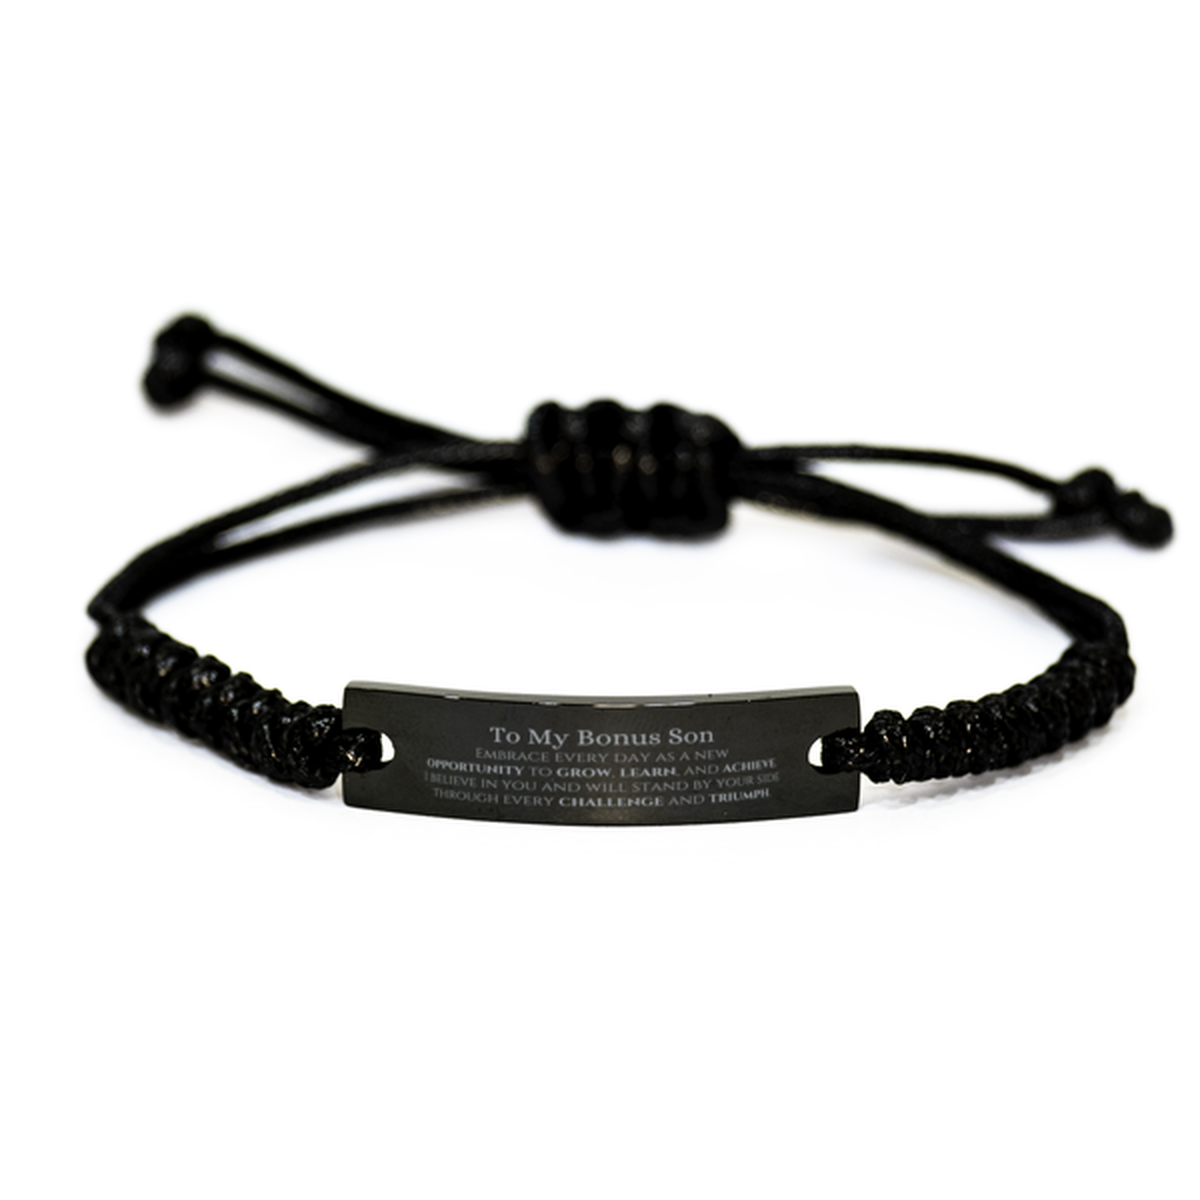 To My Bonus Son Gifts, I believe in you and will stand by your side, Inspirational Black Rope Bracelet For Bonus Son, Birthday Christmas Motivational Bonus Son Gifts